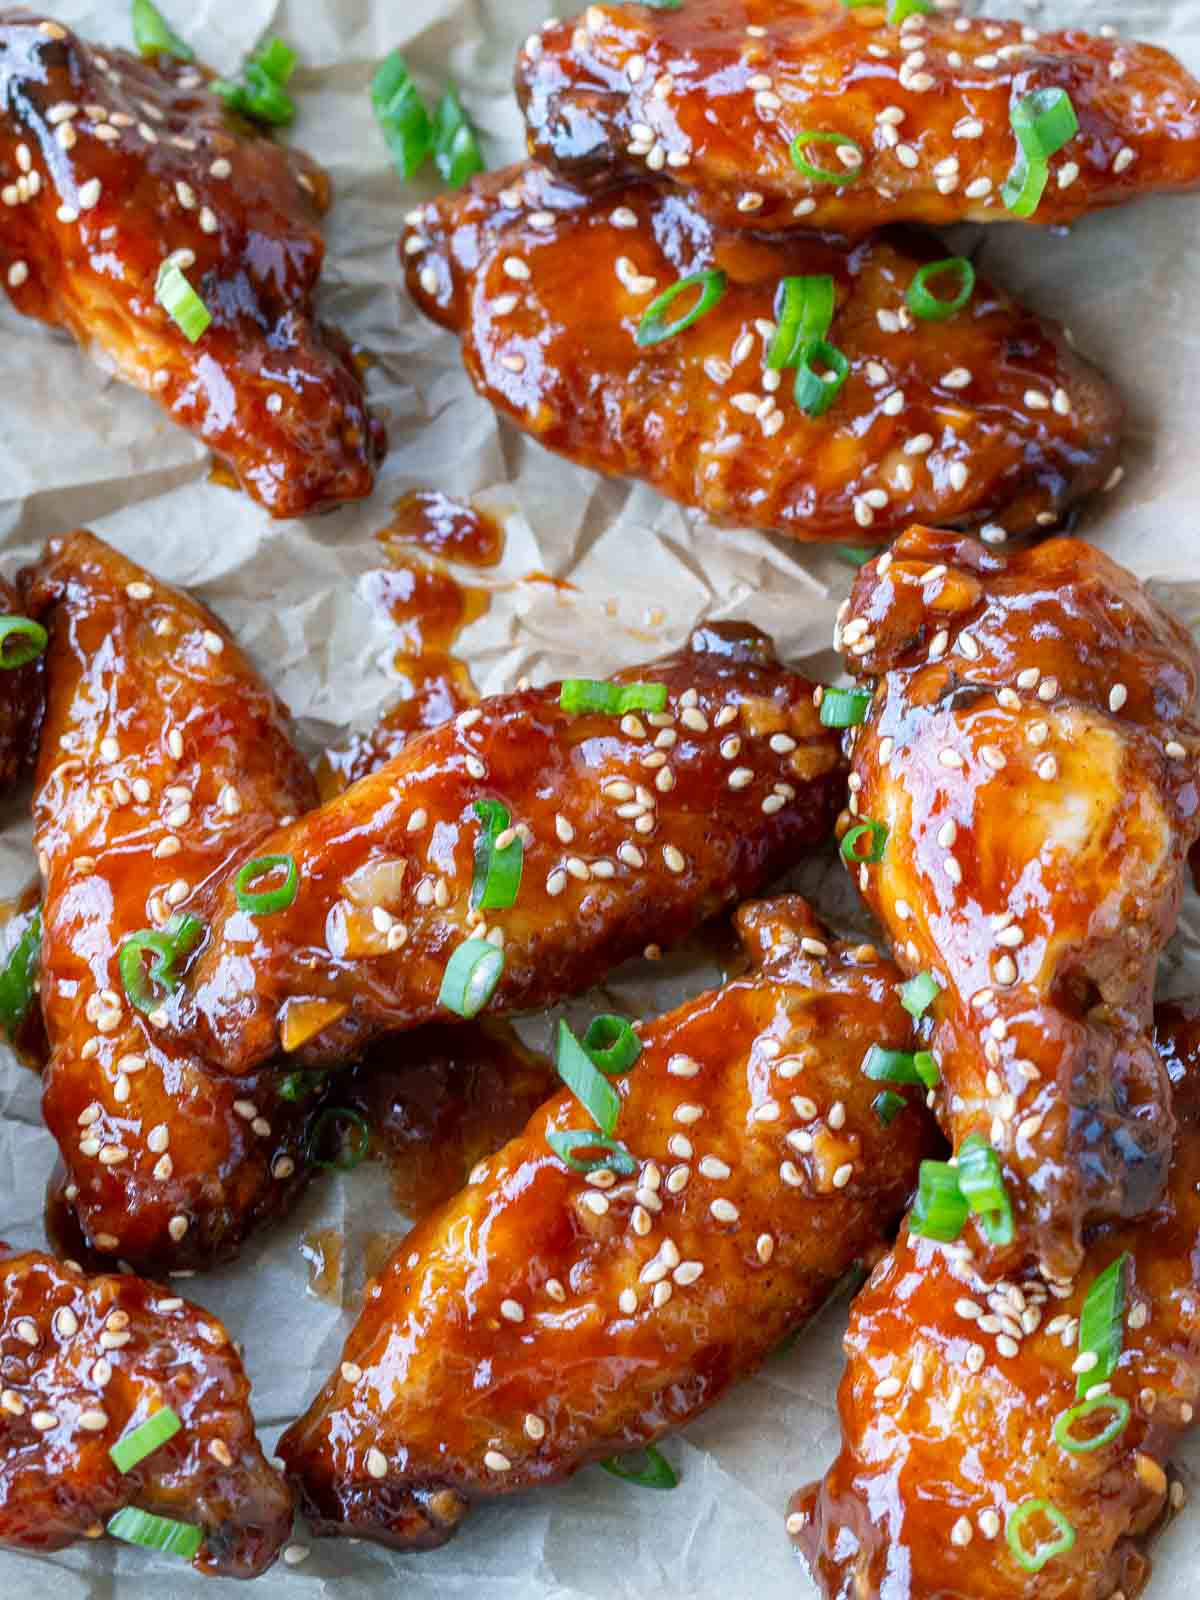 Sticky Asian wings garnished with green onions and sesame seeds.